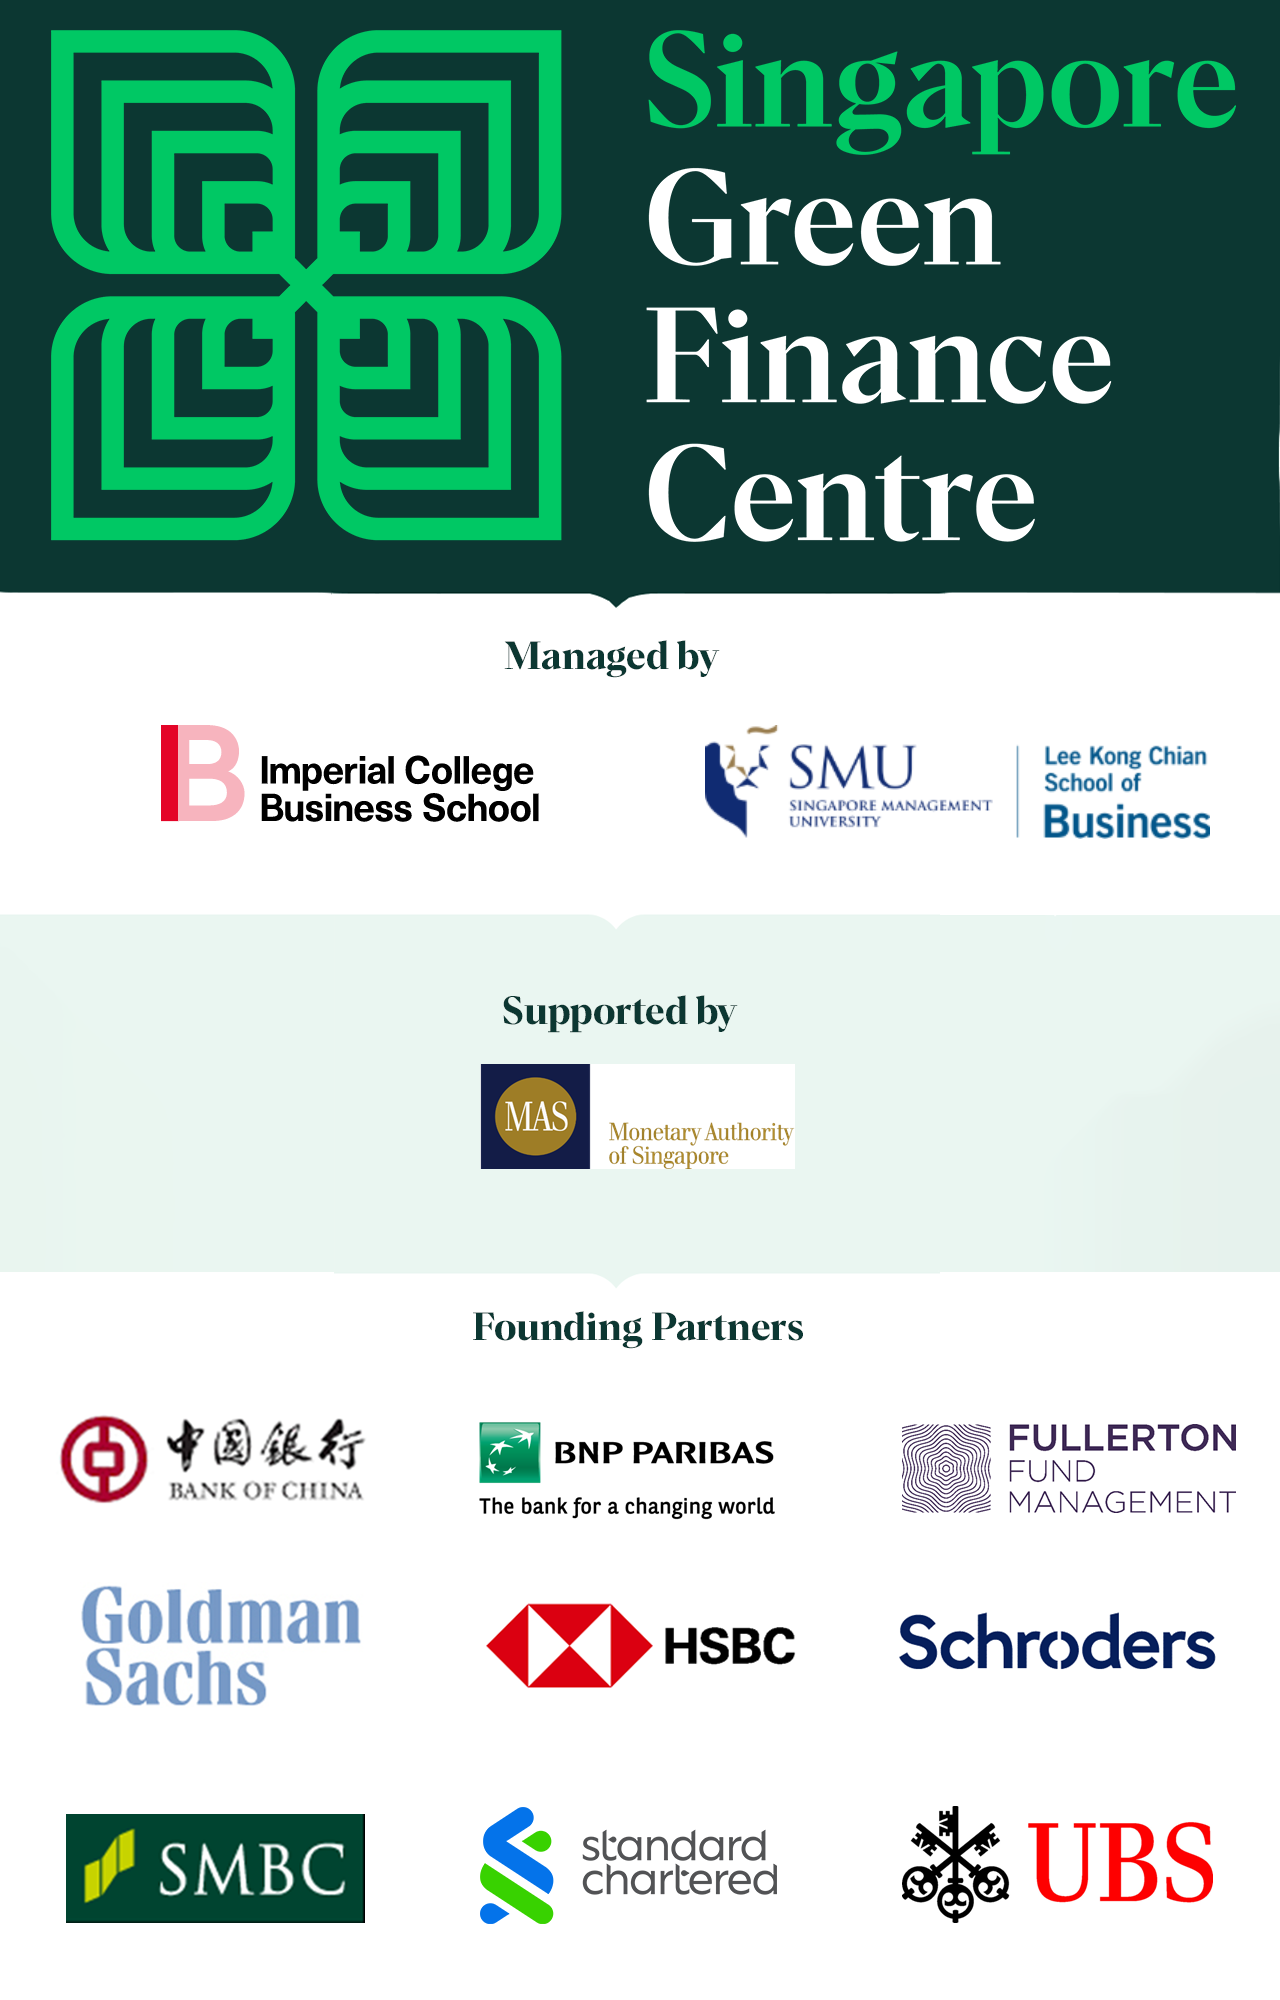 SGFC managed by SKBI & Imperial, supported by MAS, 9 founding partners